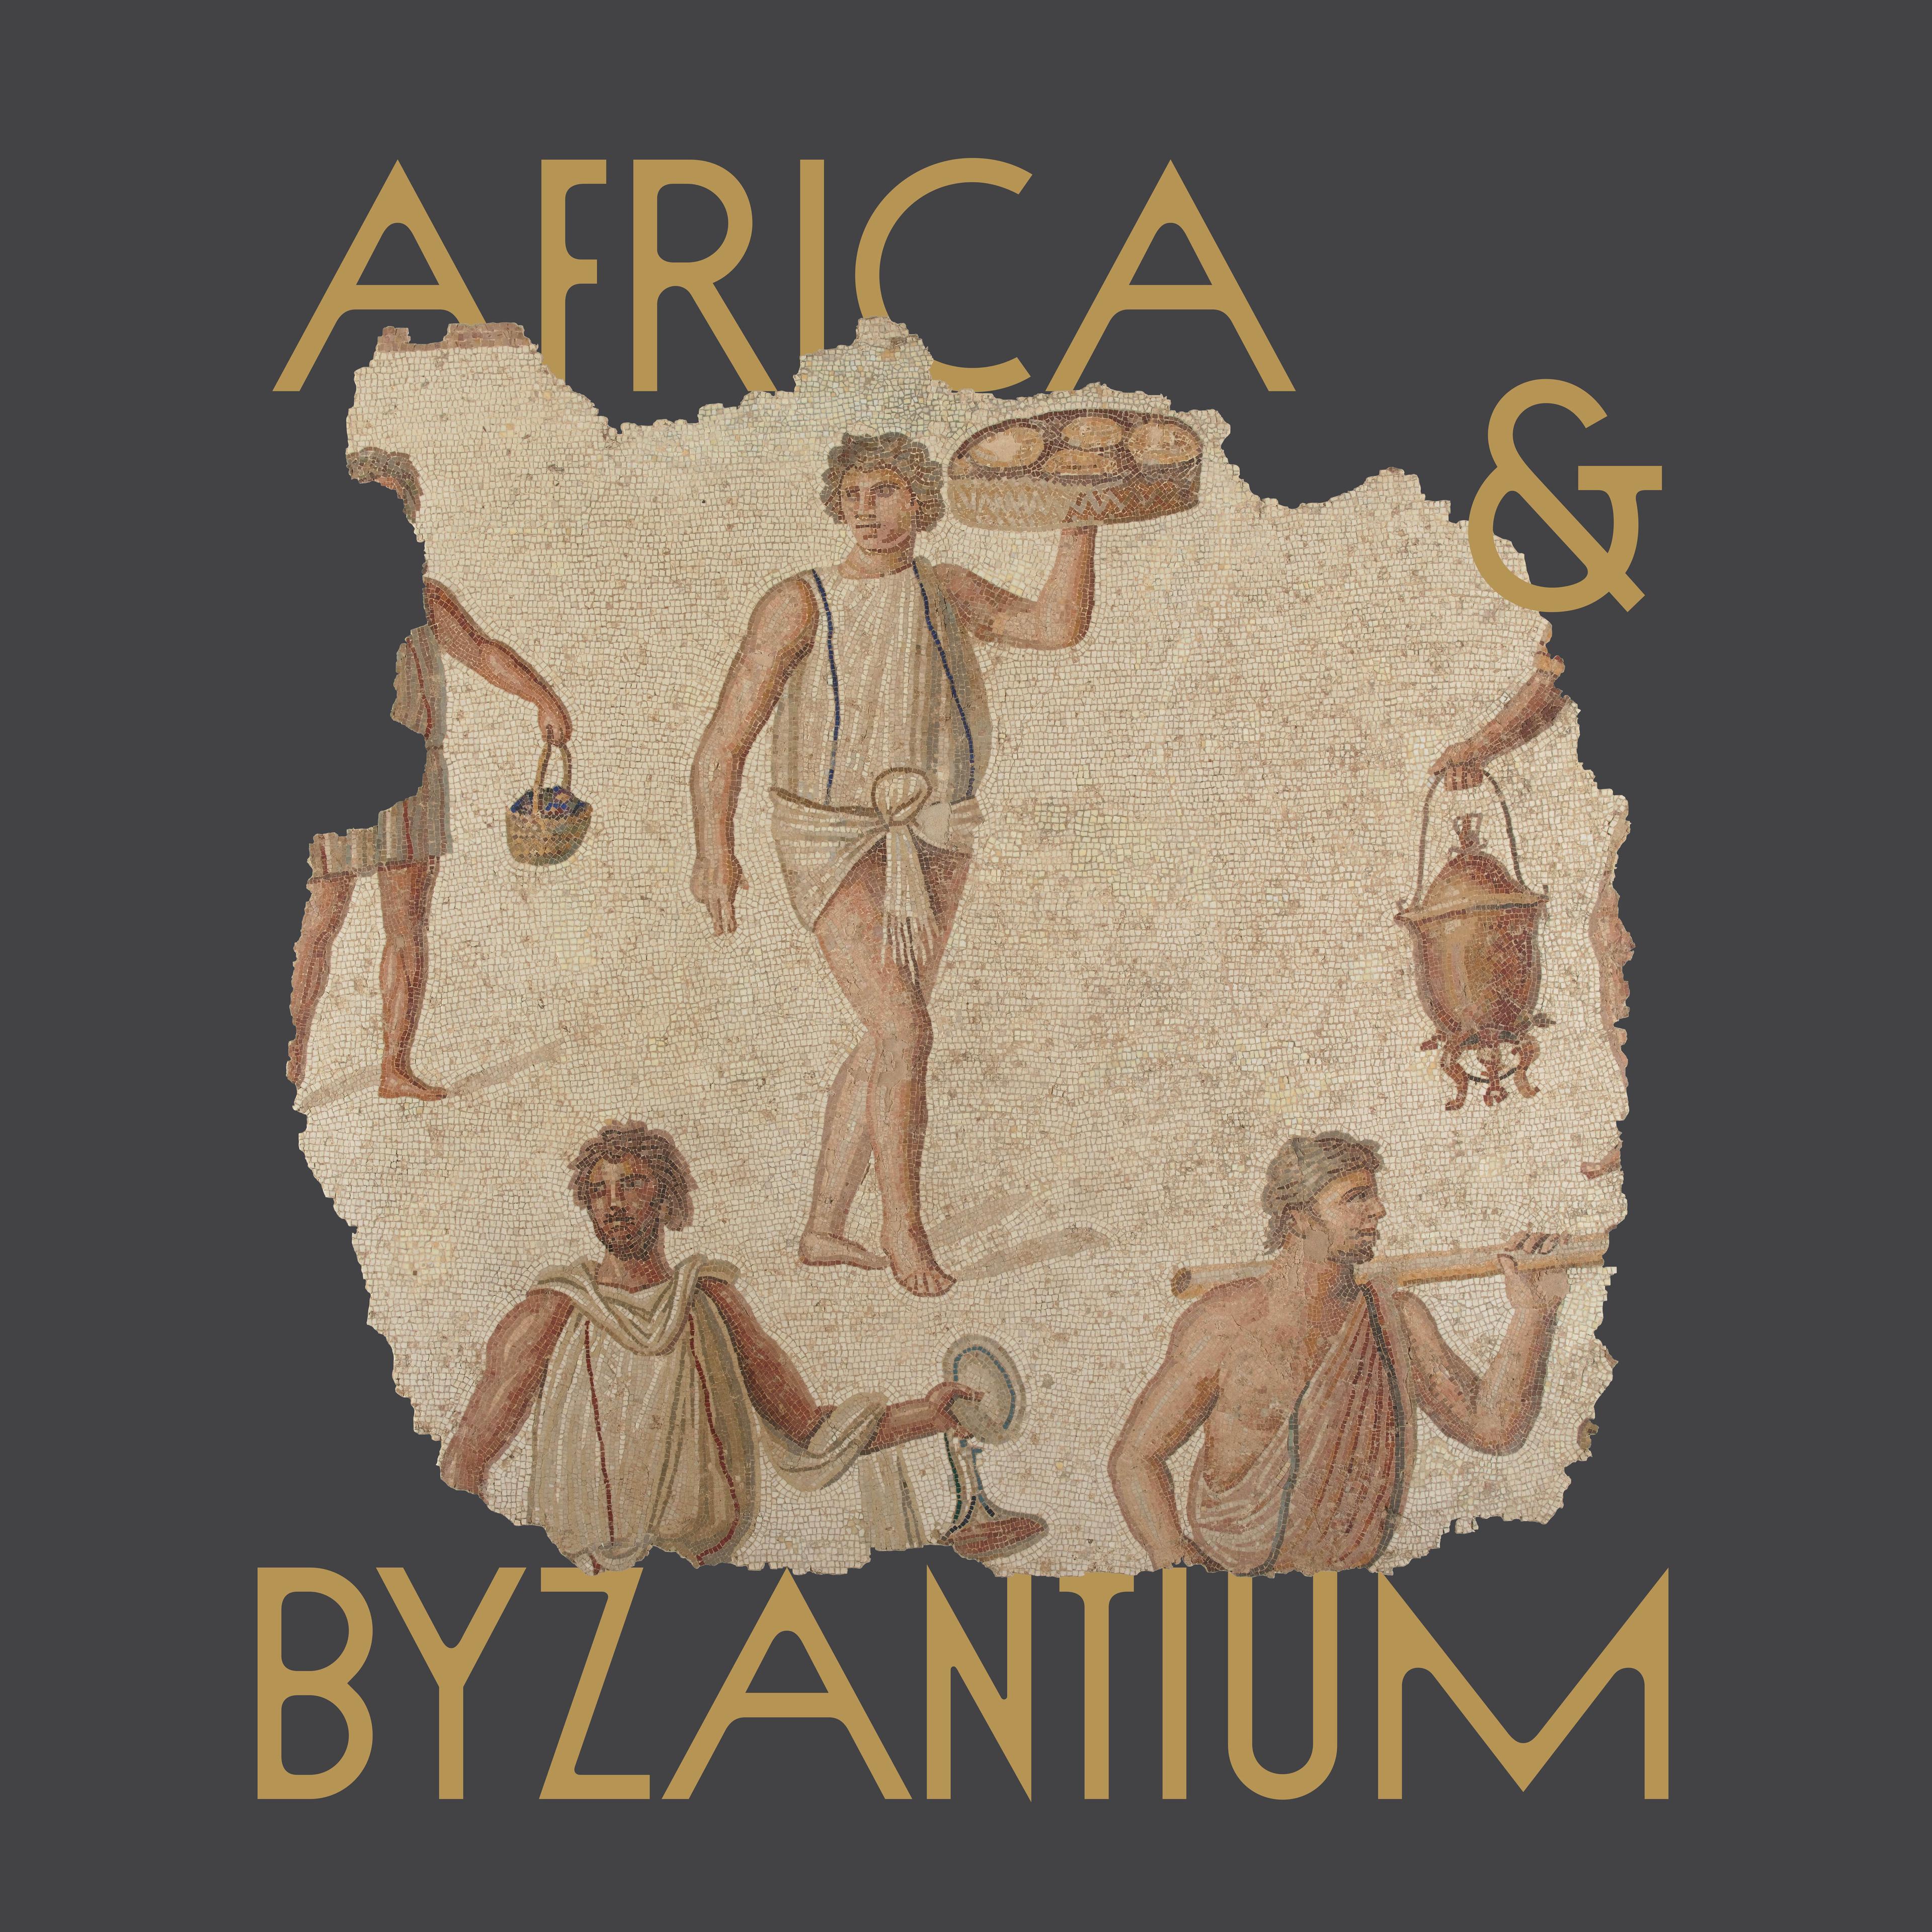 Mosaic in the shape of a map with a title in yellow that reads "Africa & Byzantium"